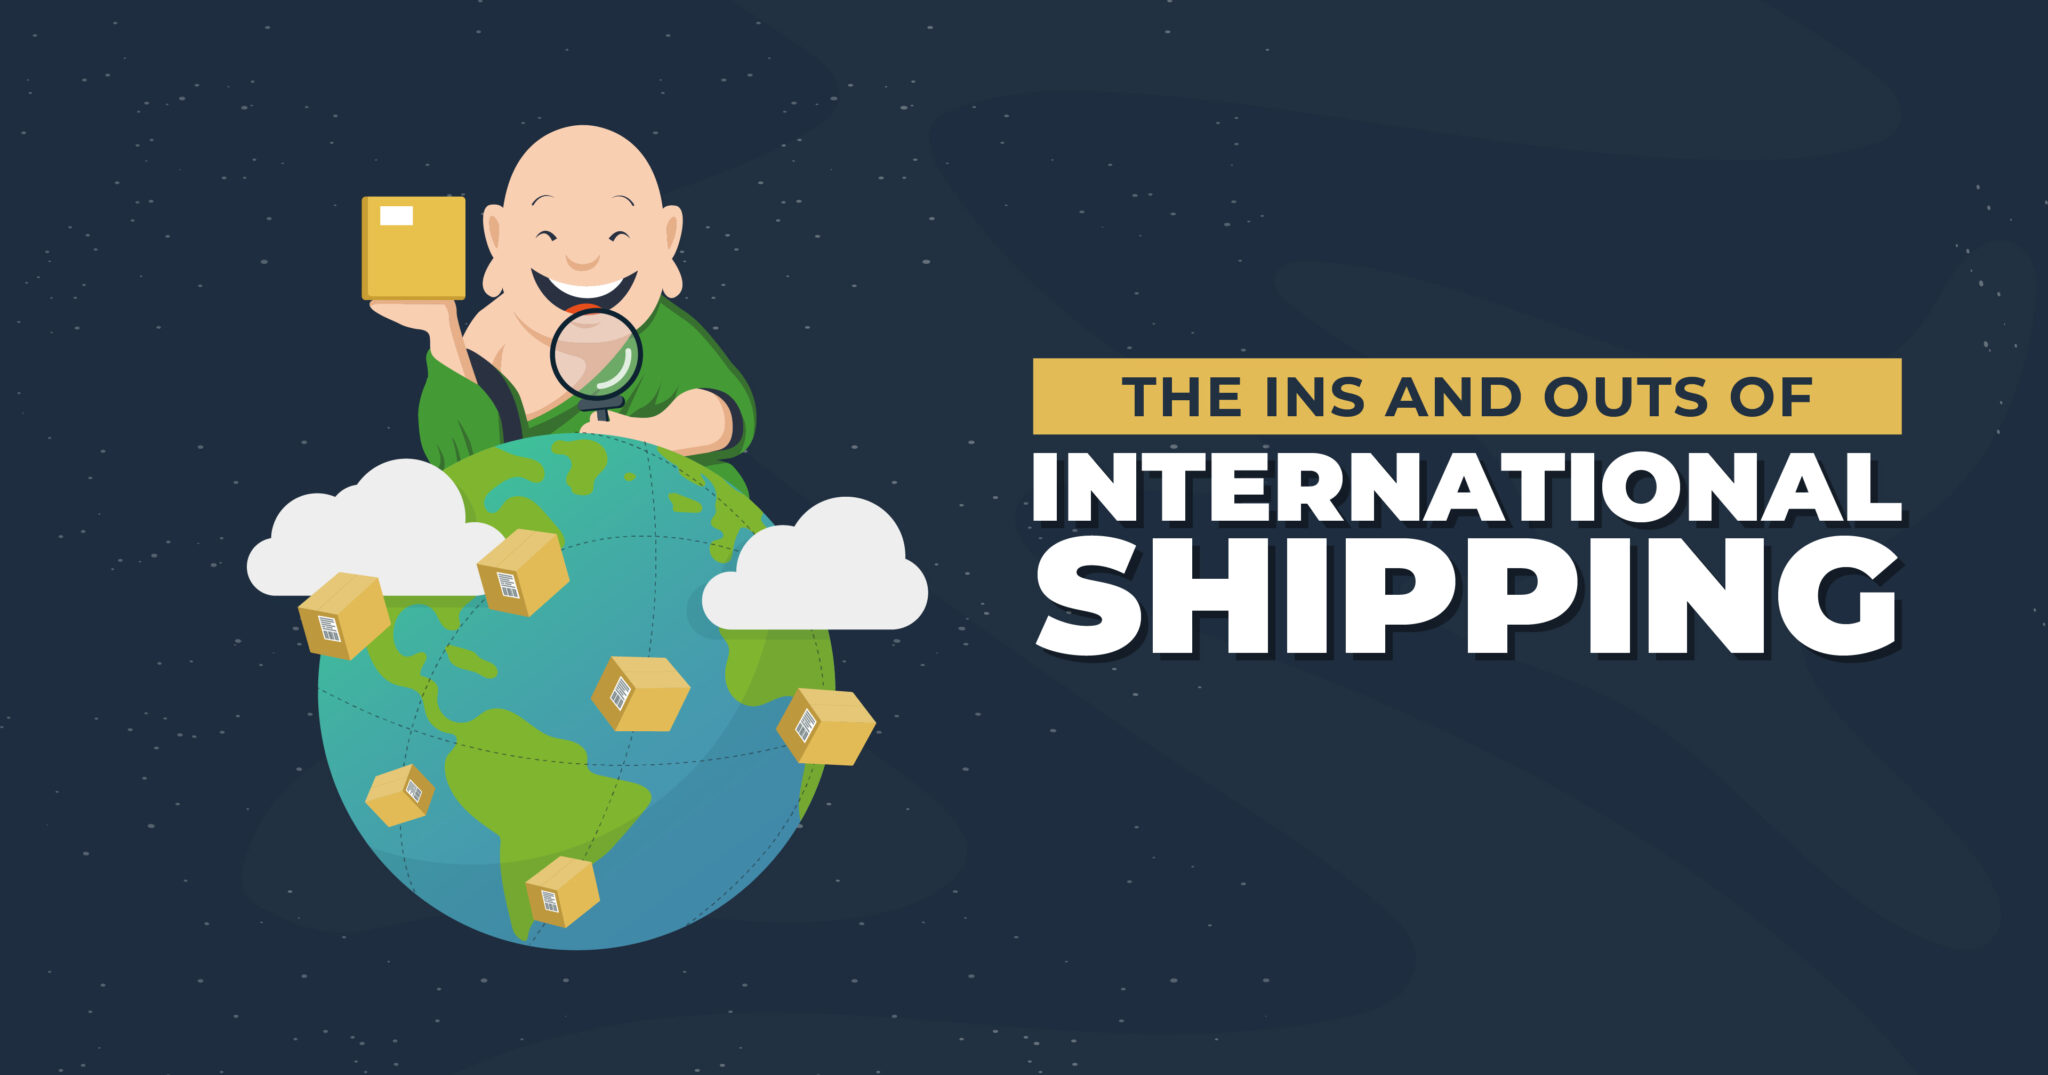 The Ins and Outs of International Shipping